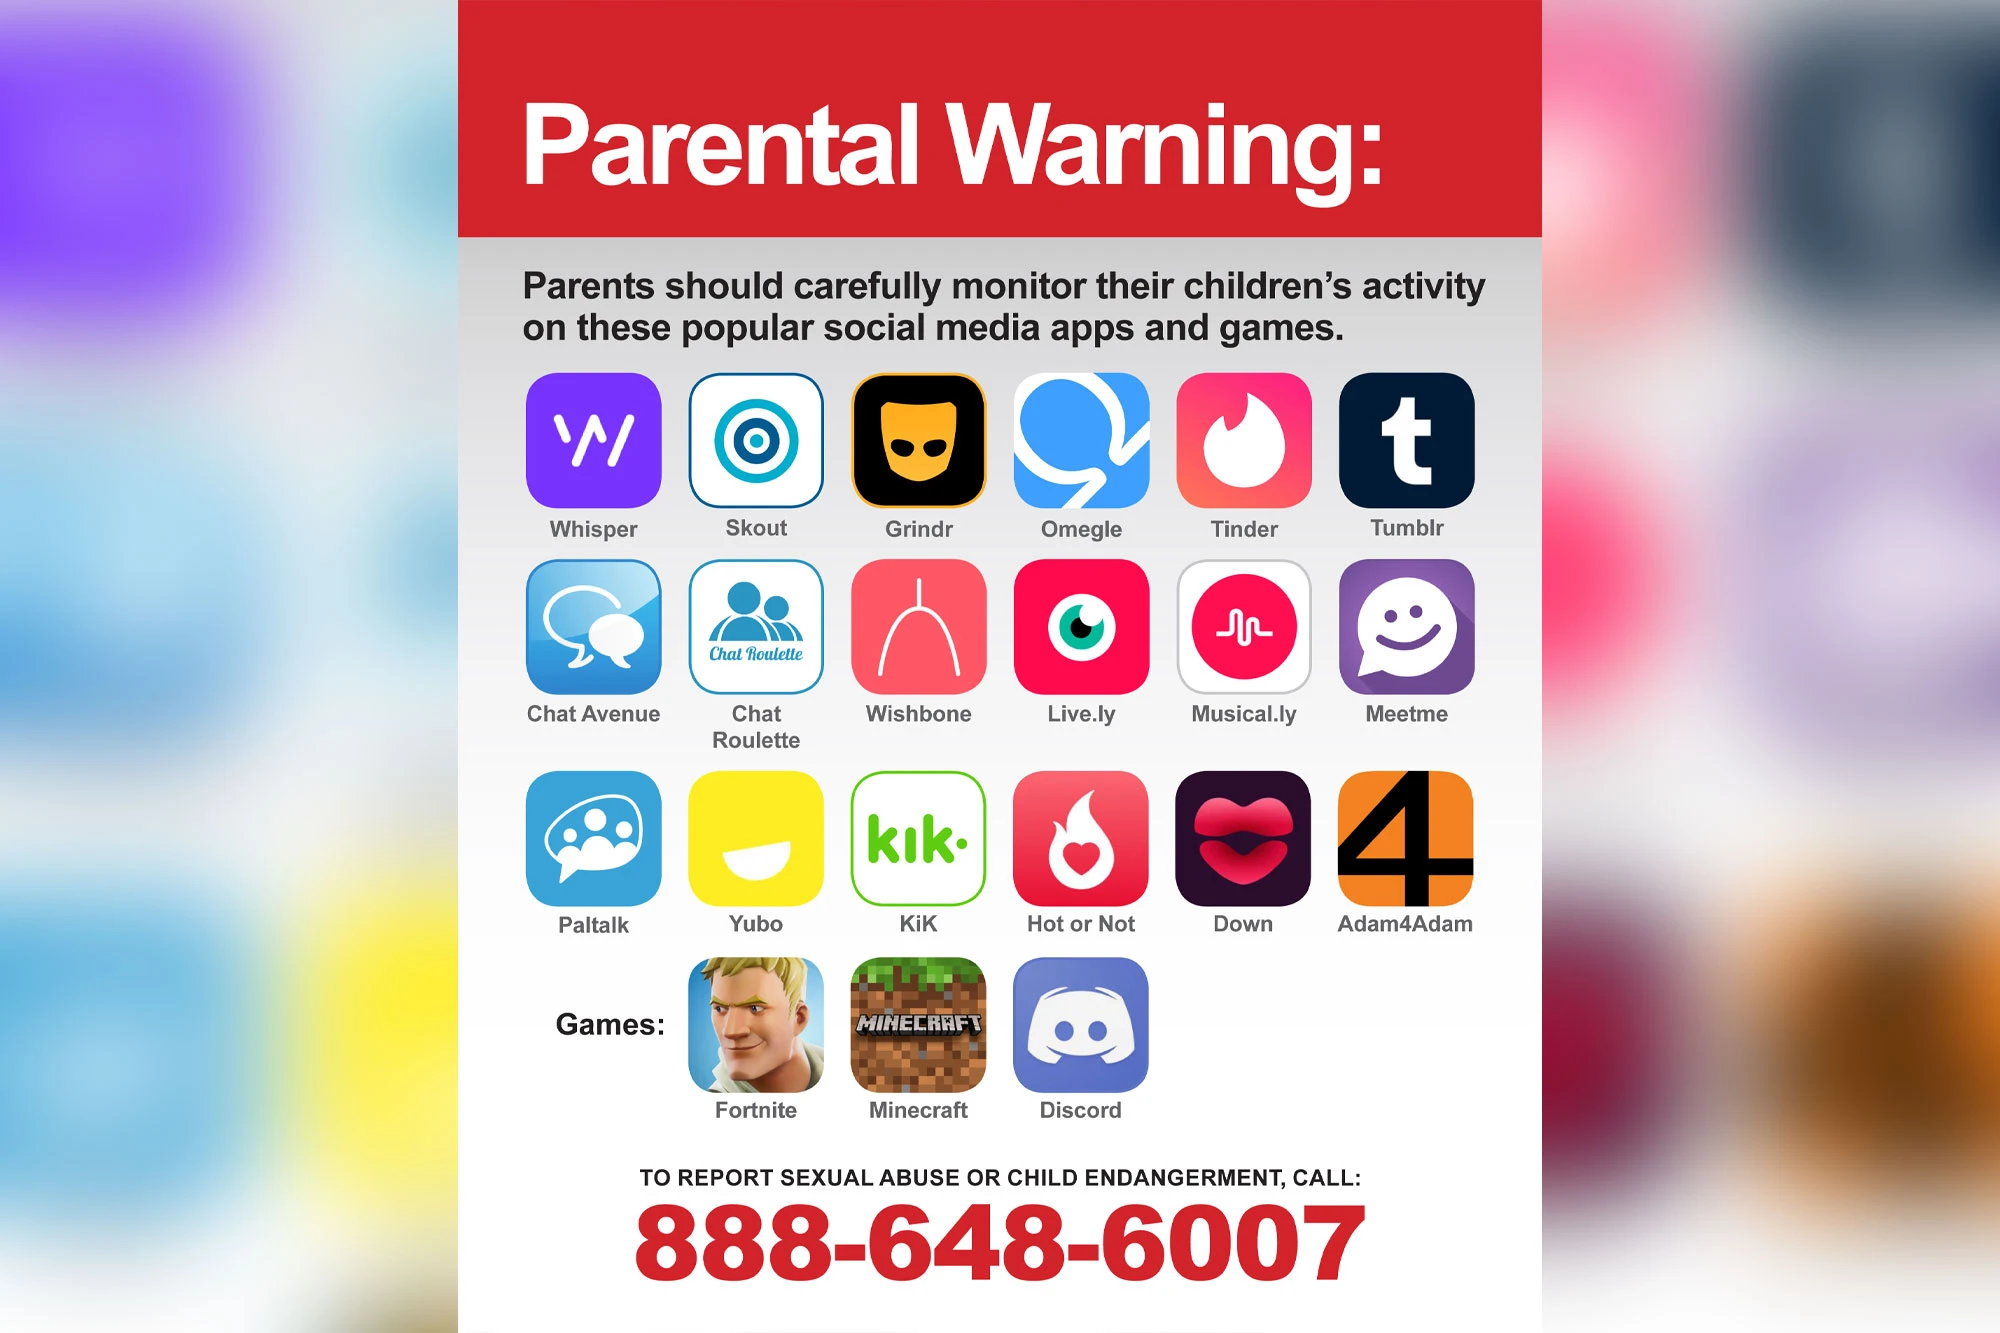 Many authorities include Omegle in the list of apps and websites dangerous for kids